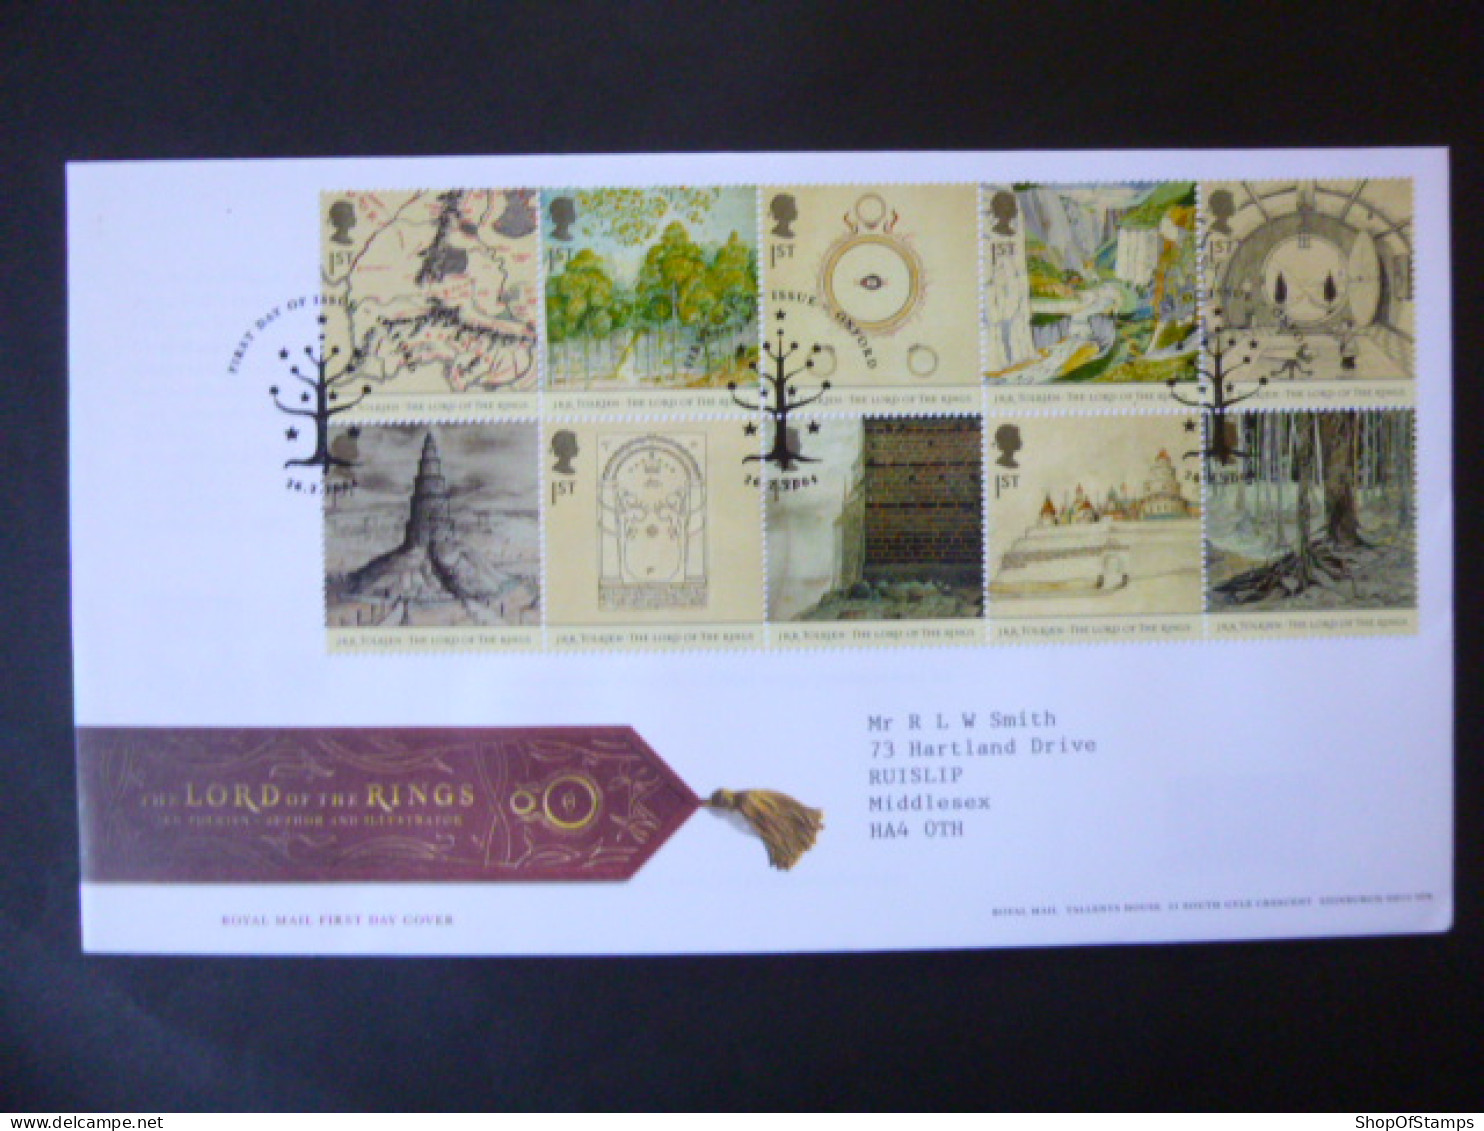 GREAT BRITAIN SG 2429-38 FELLOWSHIP OF THE RING AND THE TWO TOWERS 50YR FDC OXFORD - Unclassified